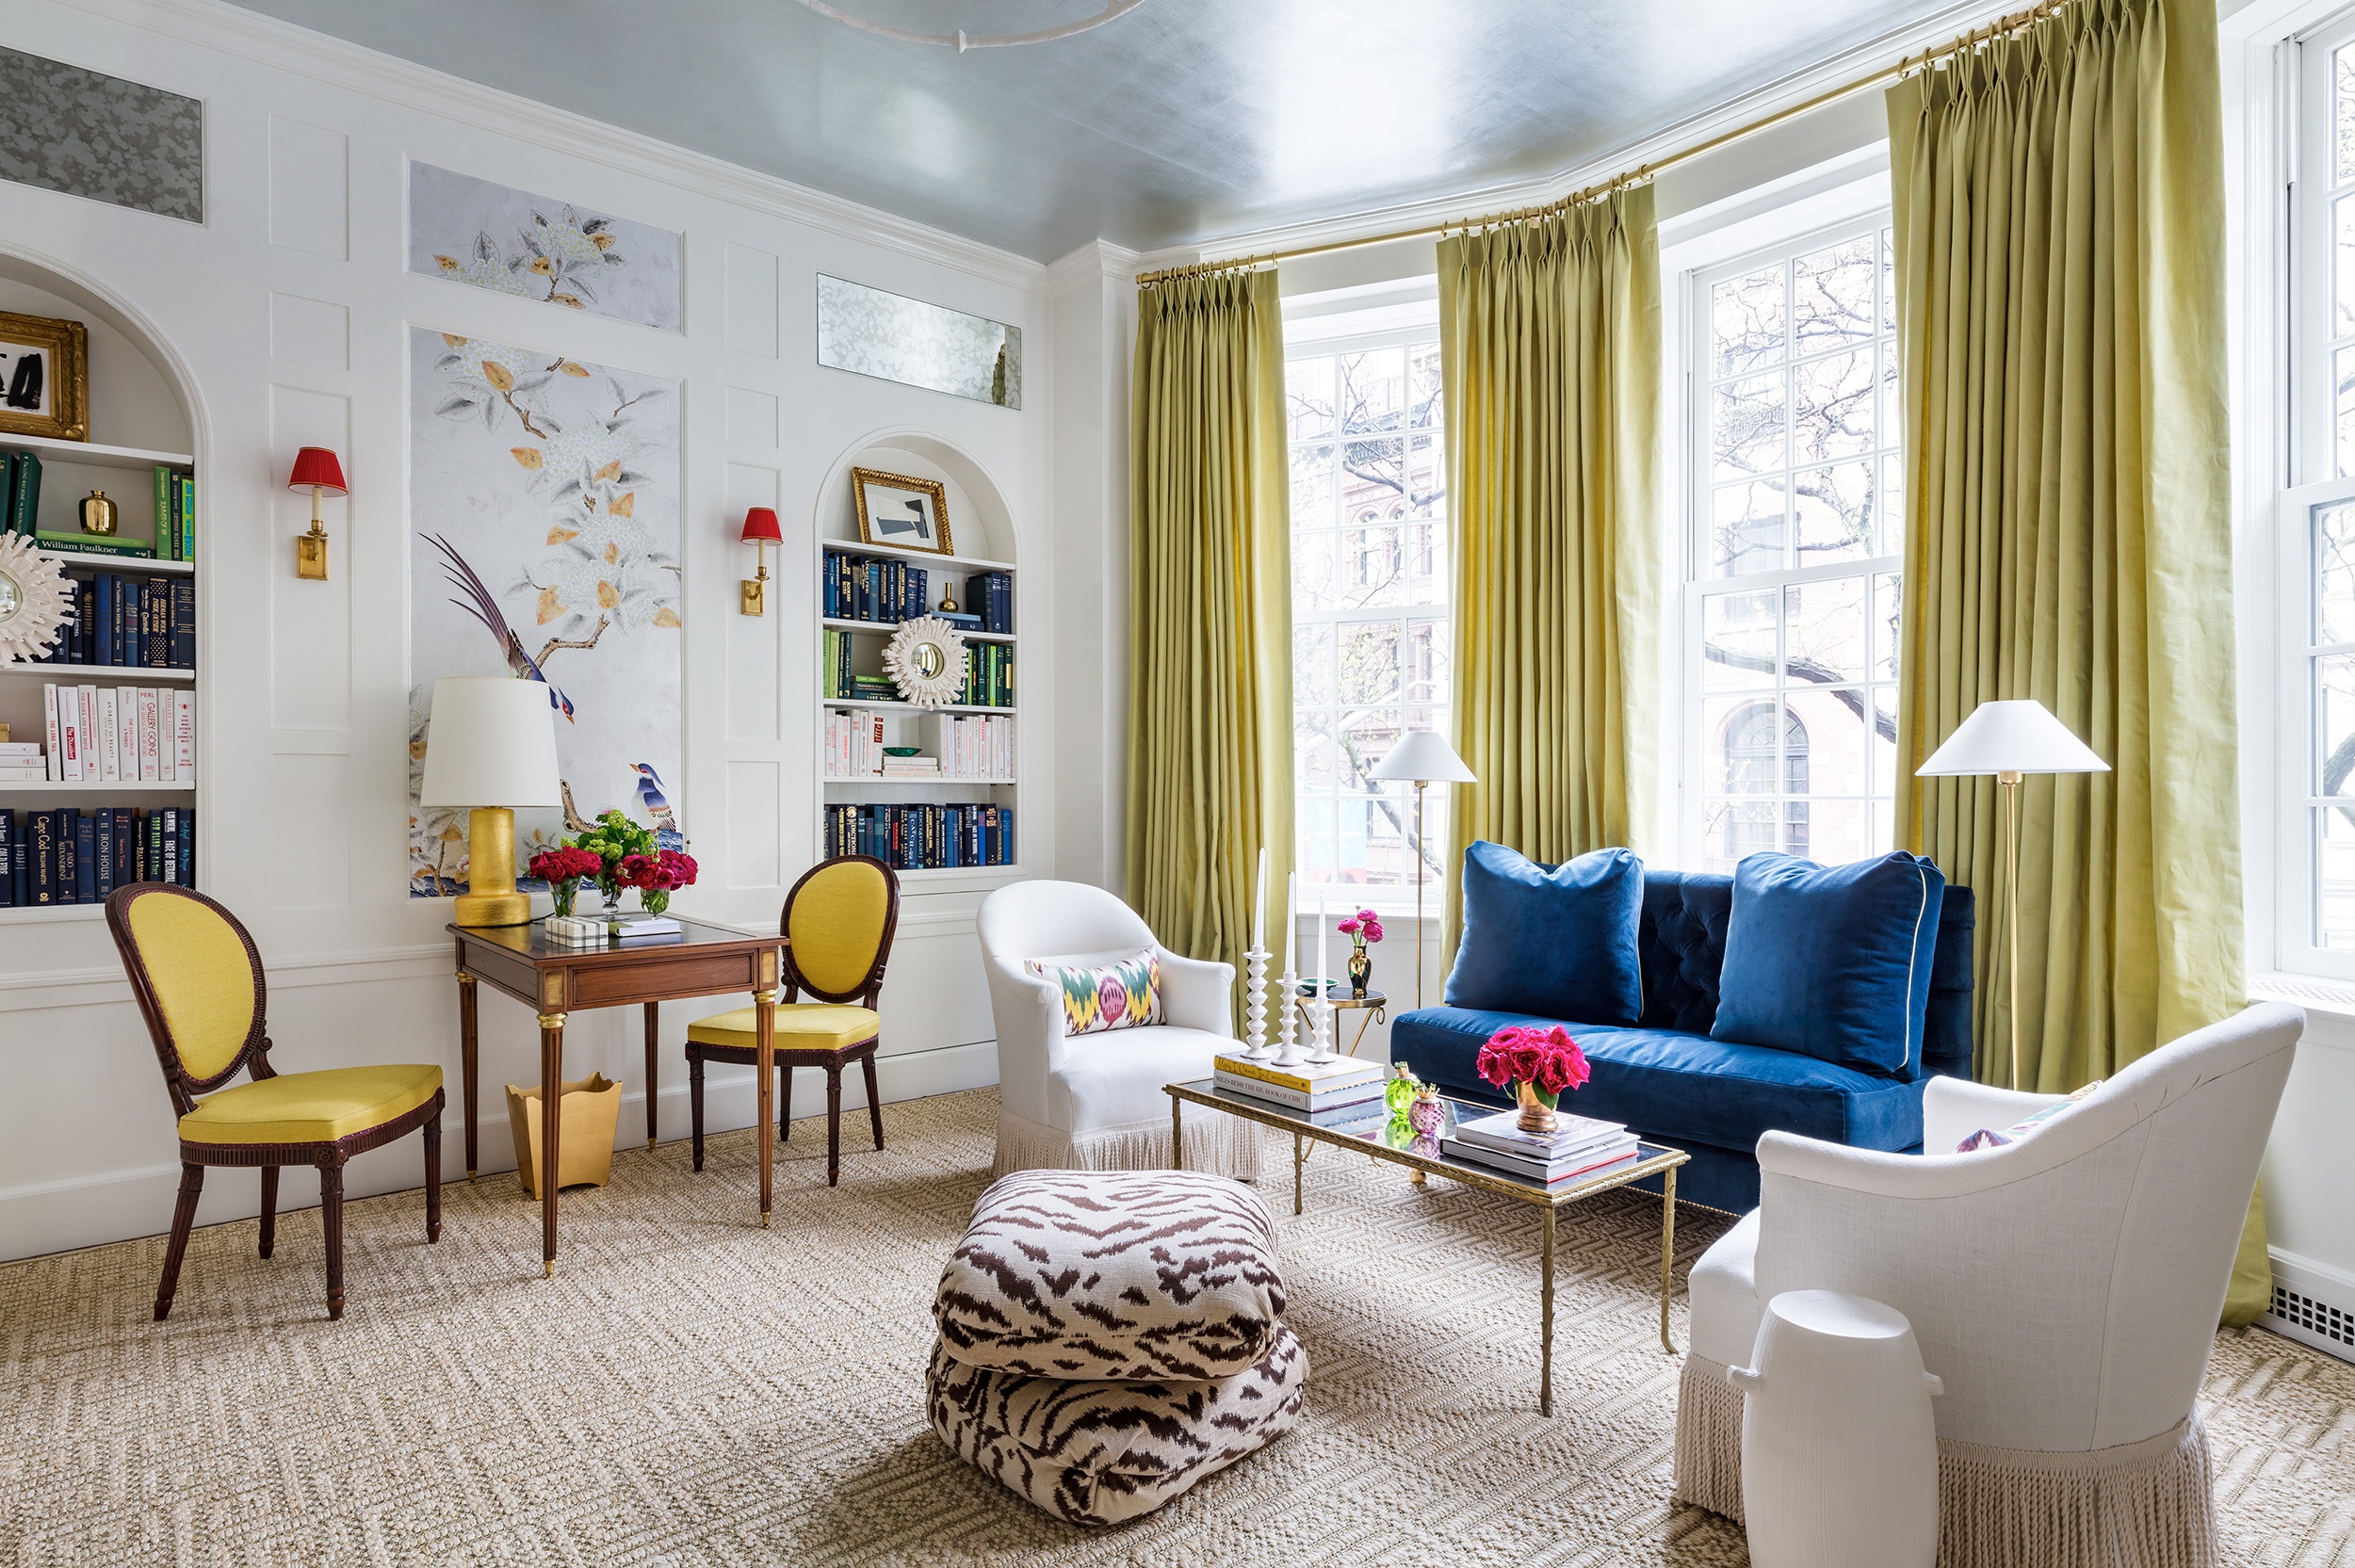 Tour the 2019 Kips Bay Decorator Show House - Galerie